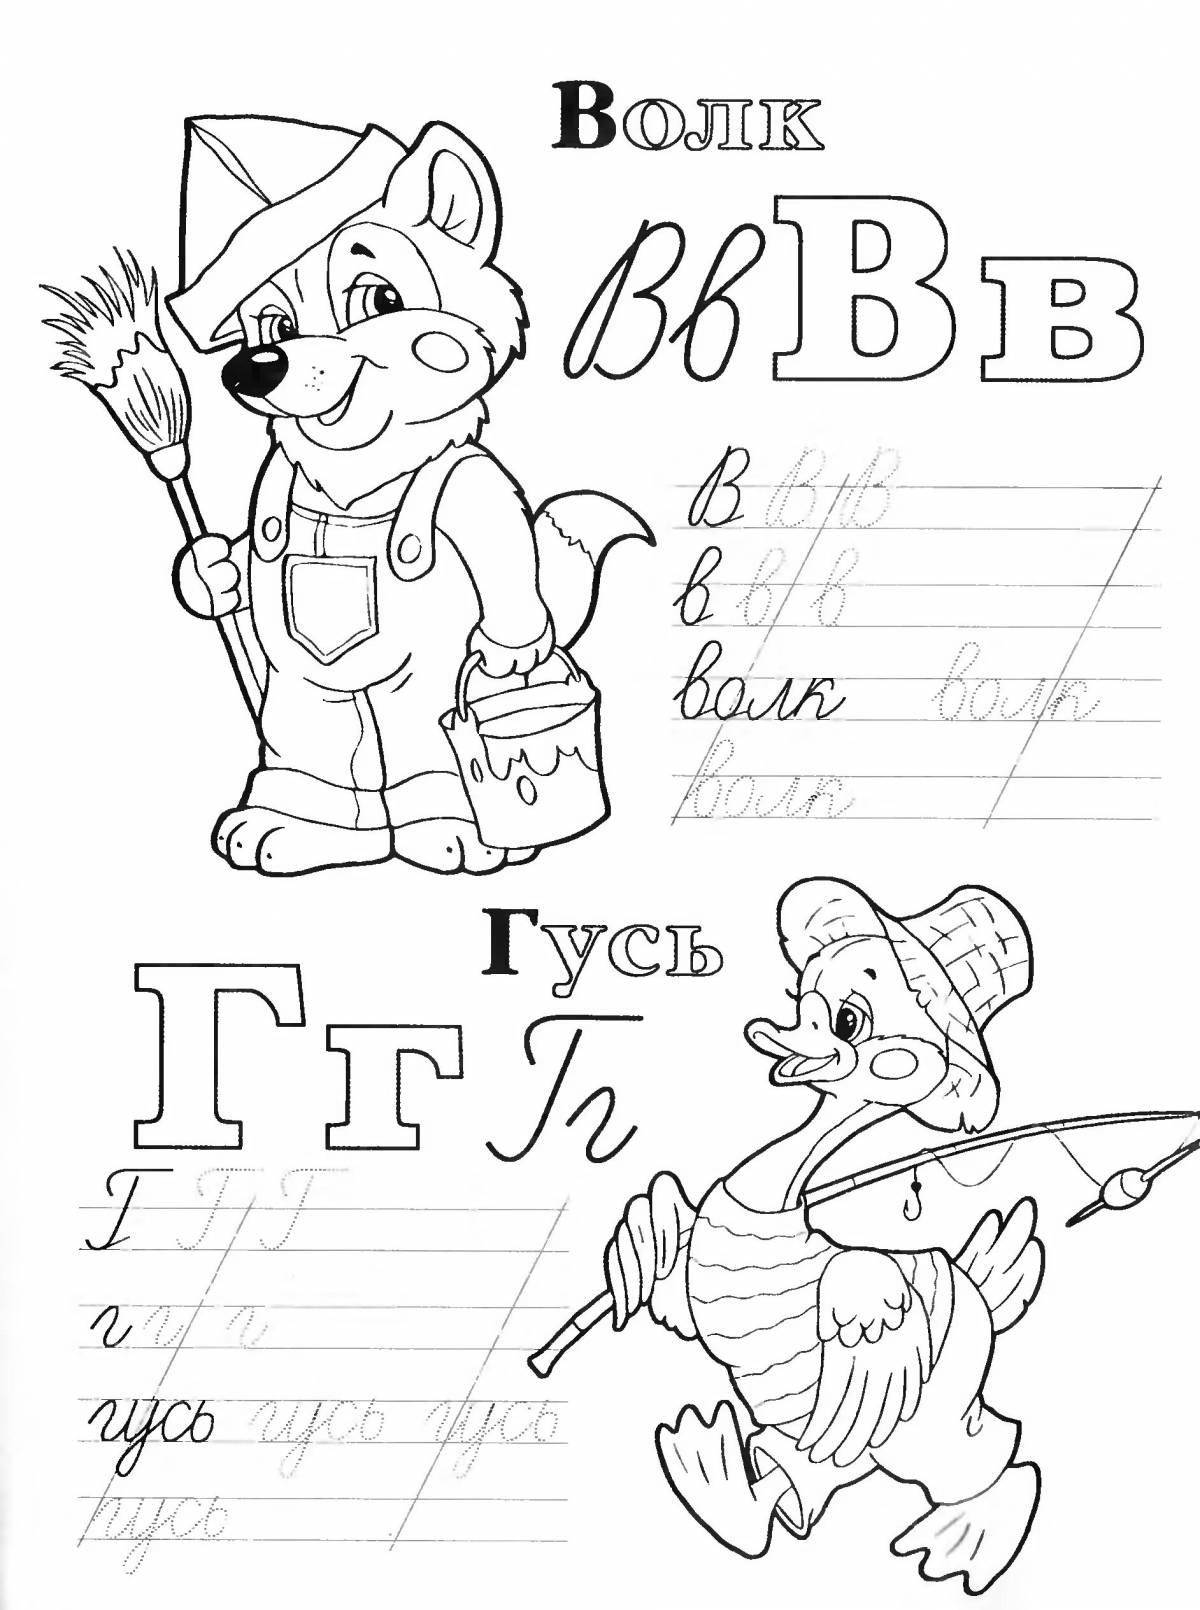 Abc laura amazing coloring page